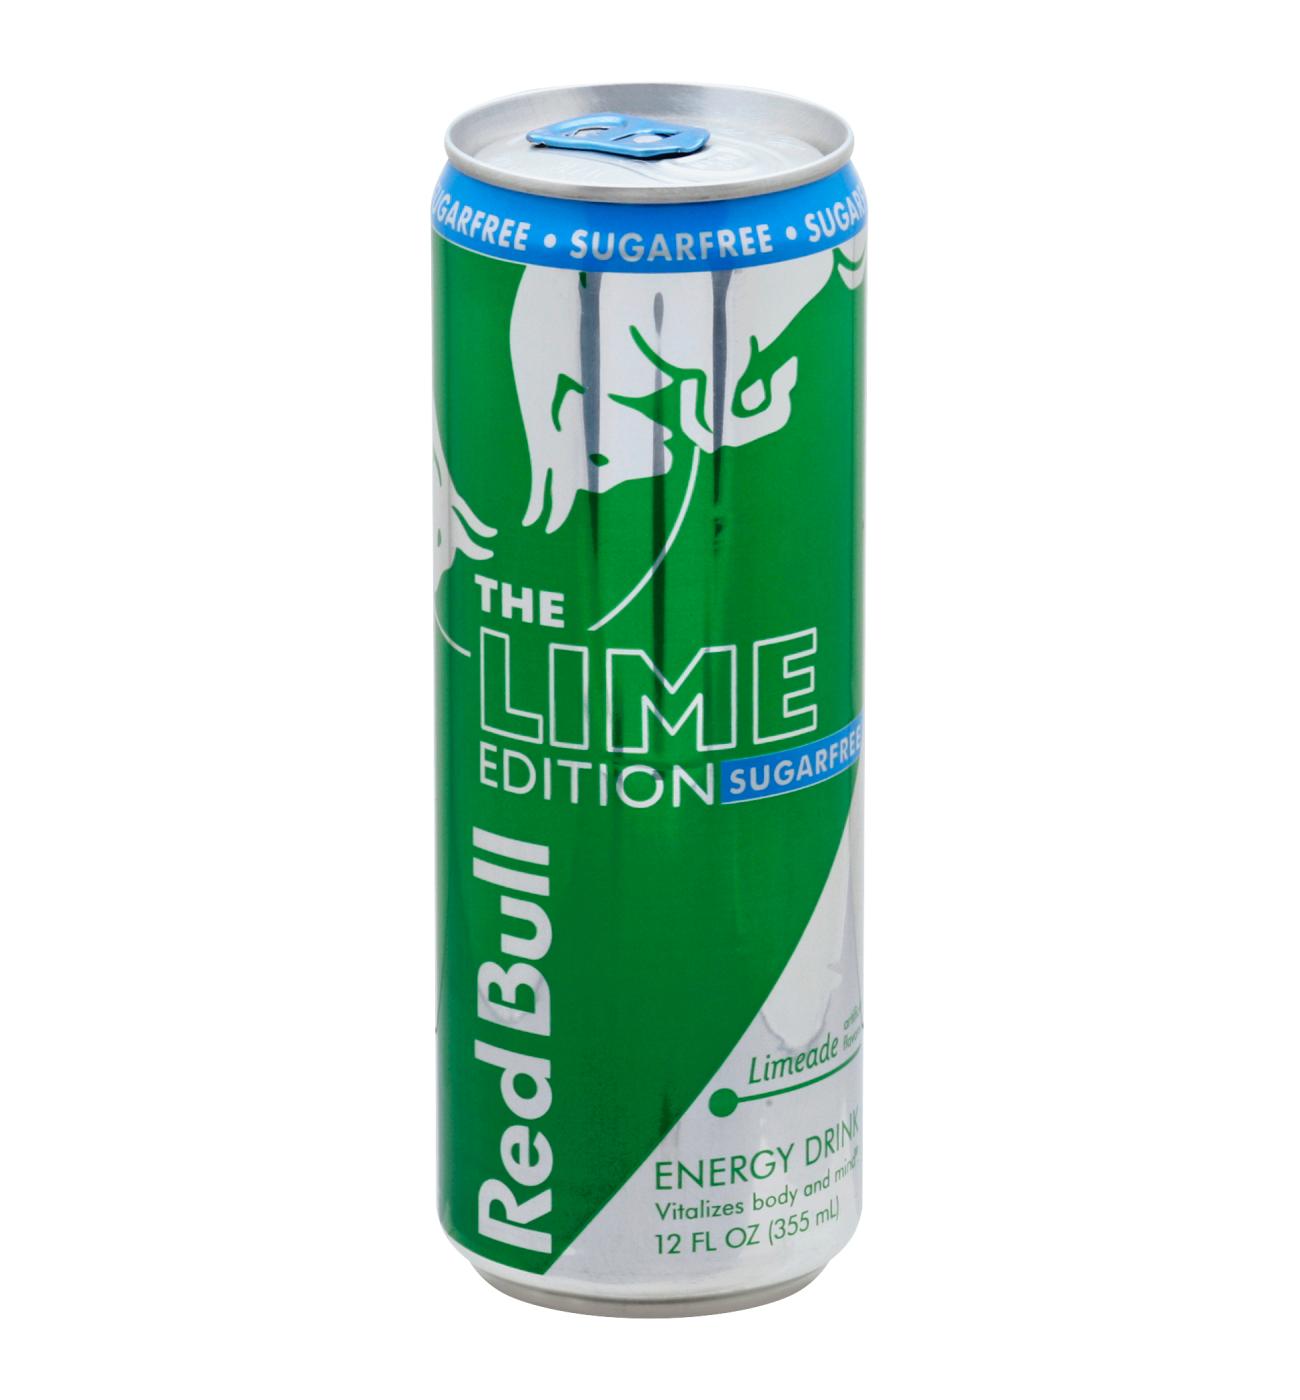 Red Bull Sugar Free The Lime Edition Limeade Energy Drink; image 1 of 2